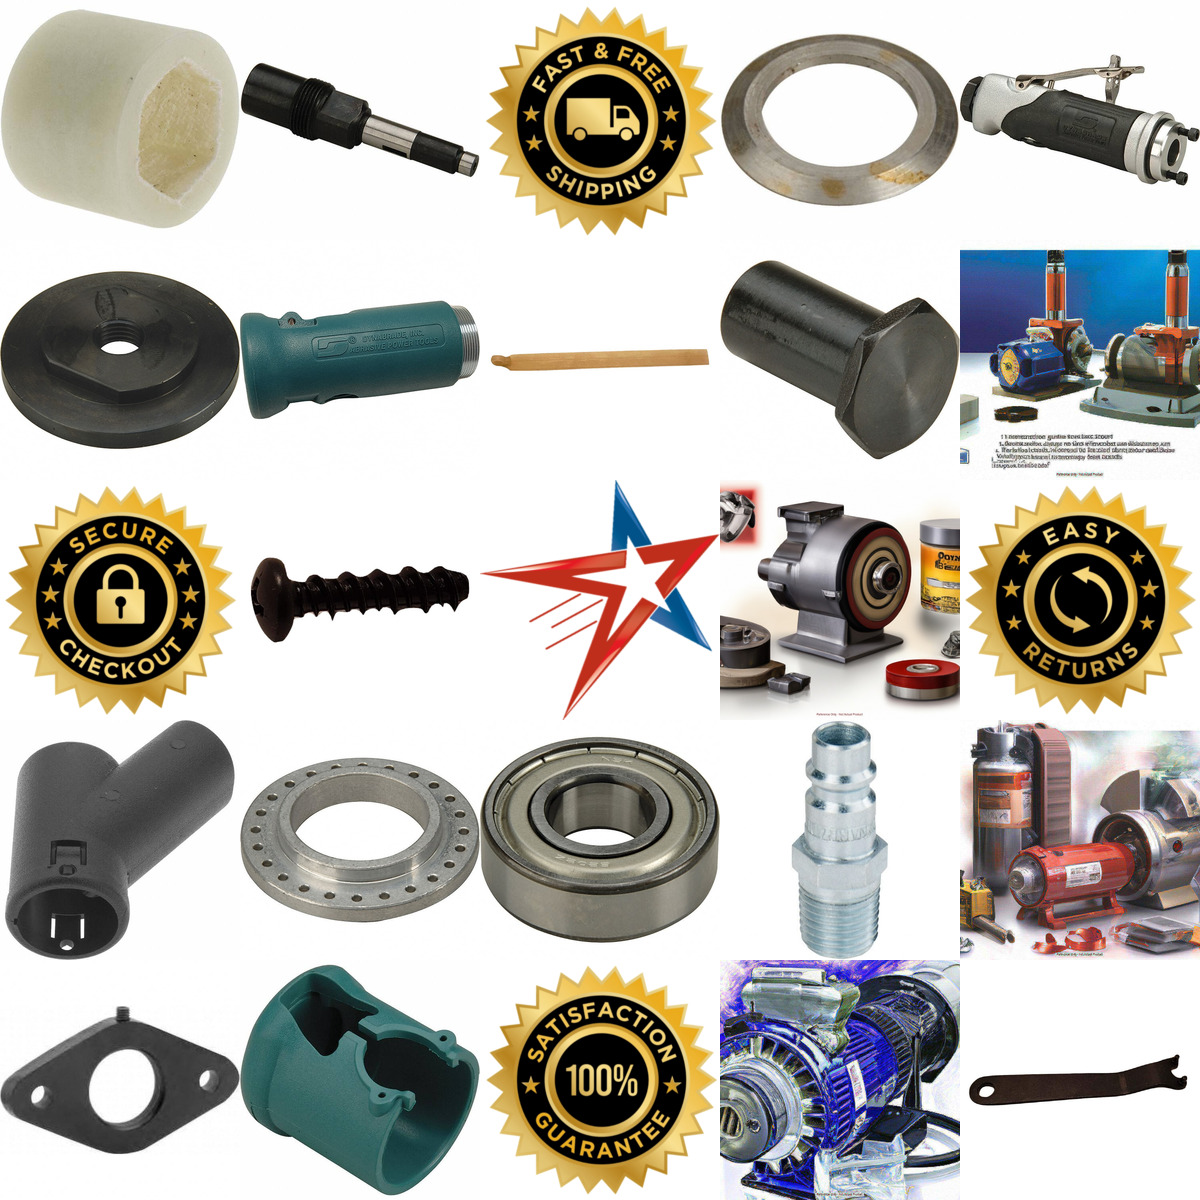 A selection of Power Grinder Buffer and Sander Parts and Repair Tools products on GoVets